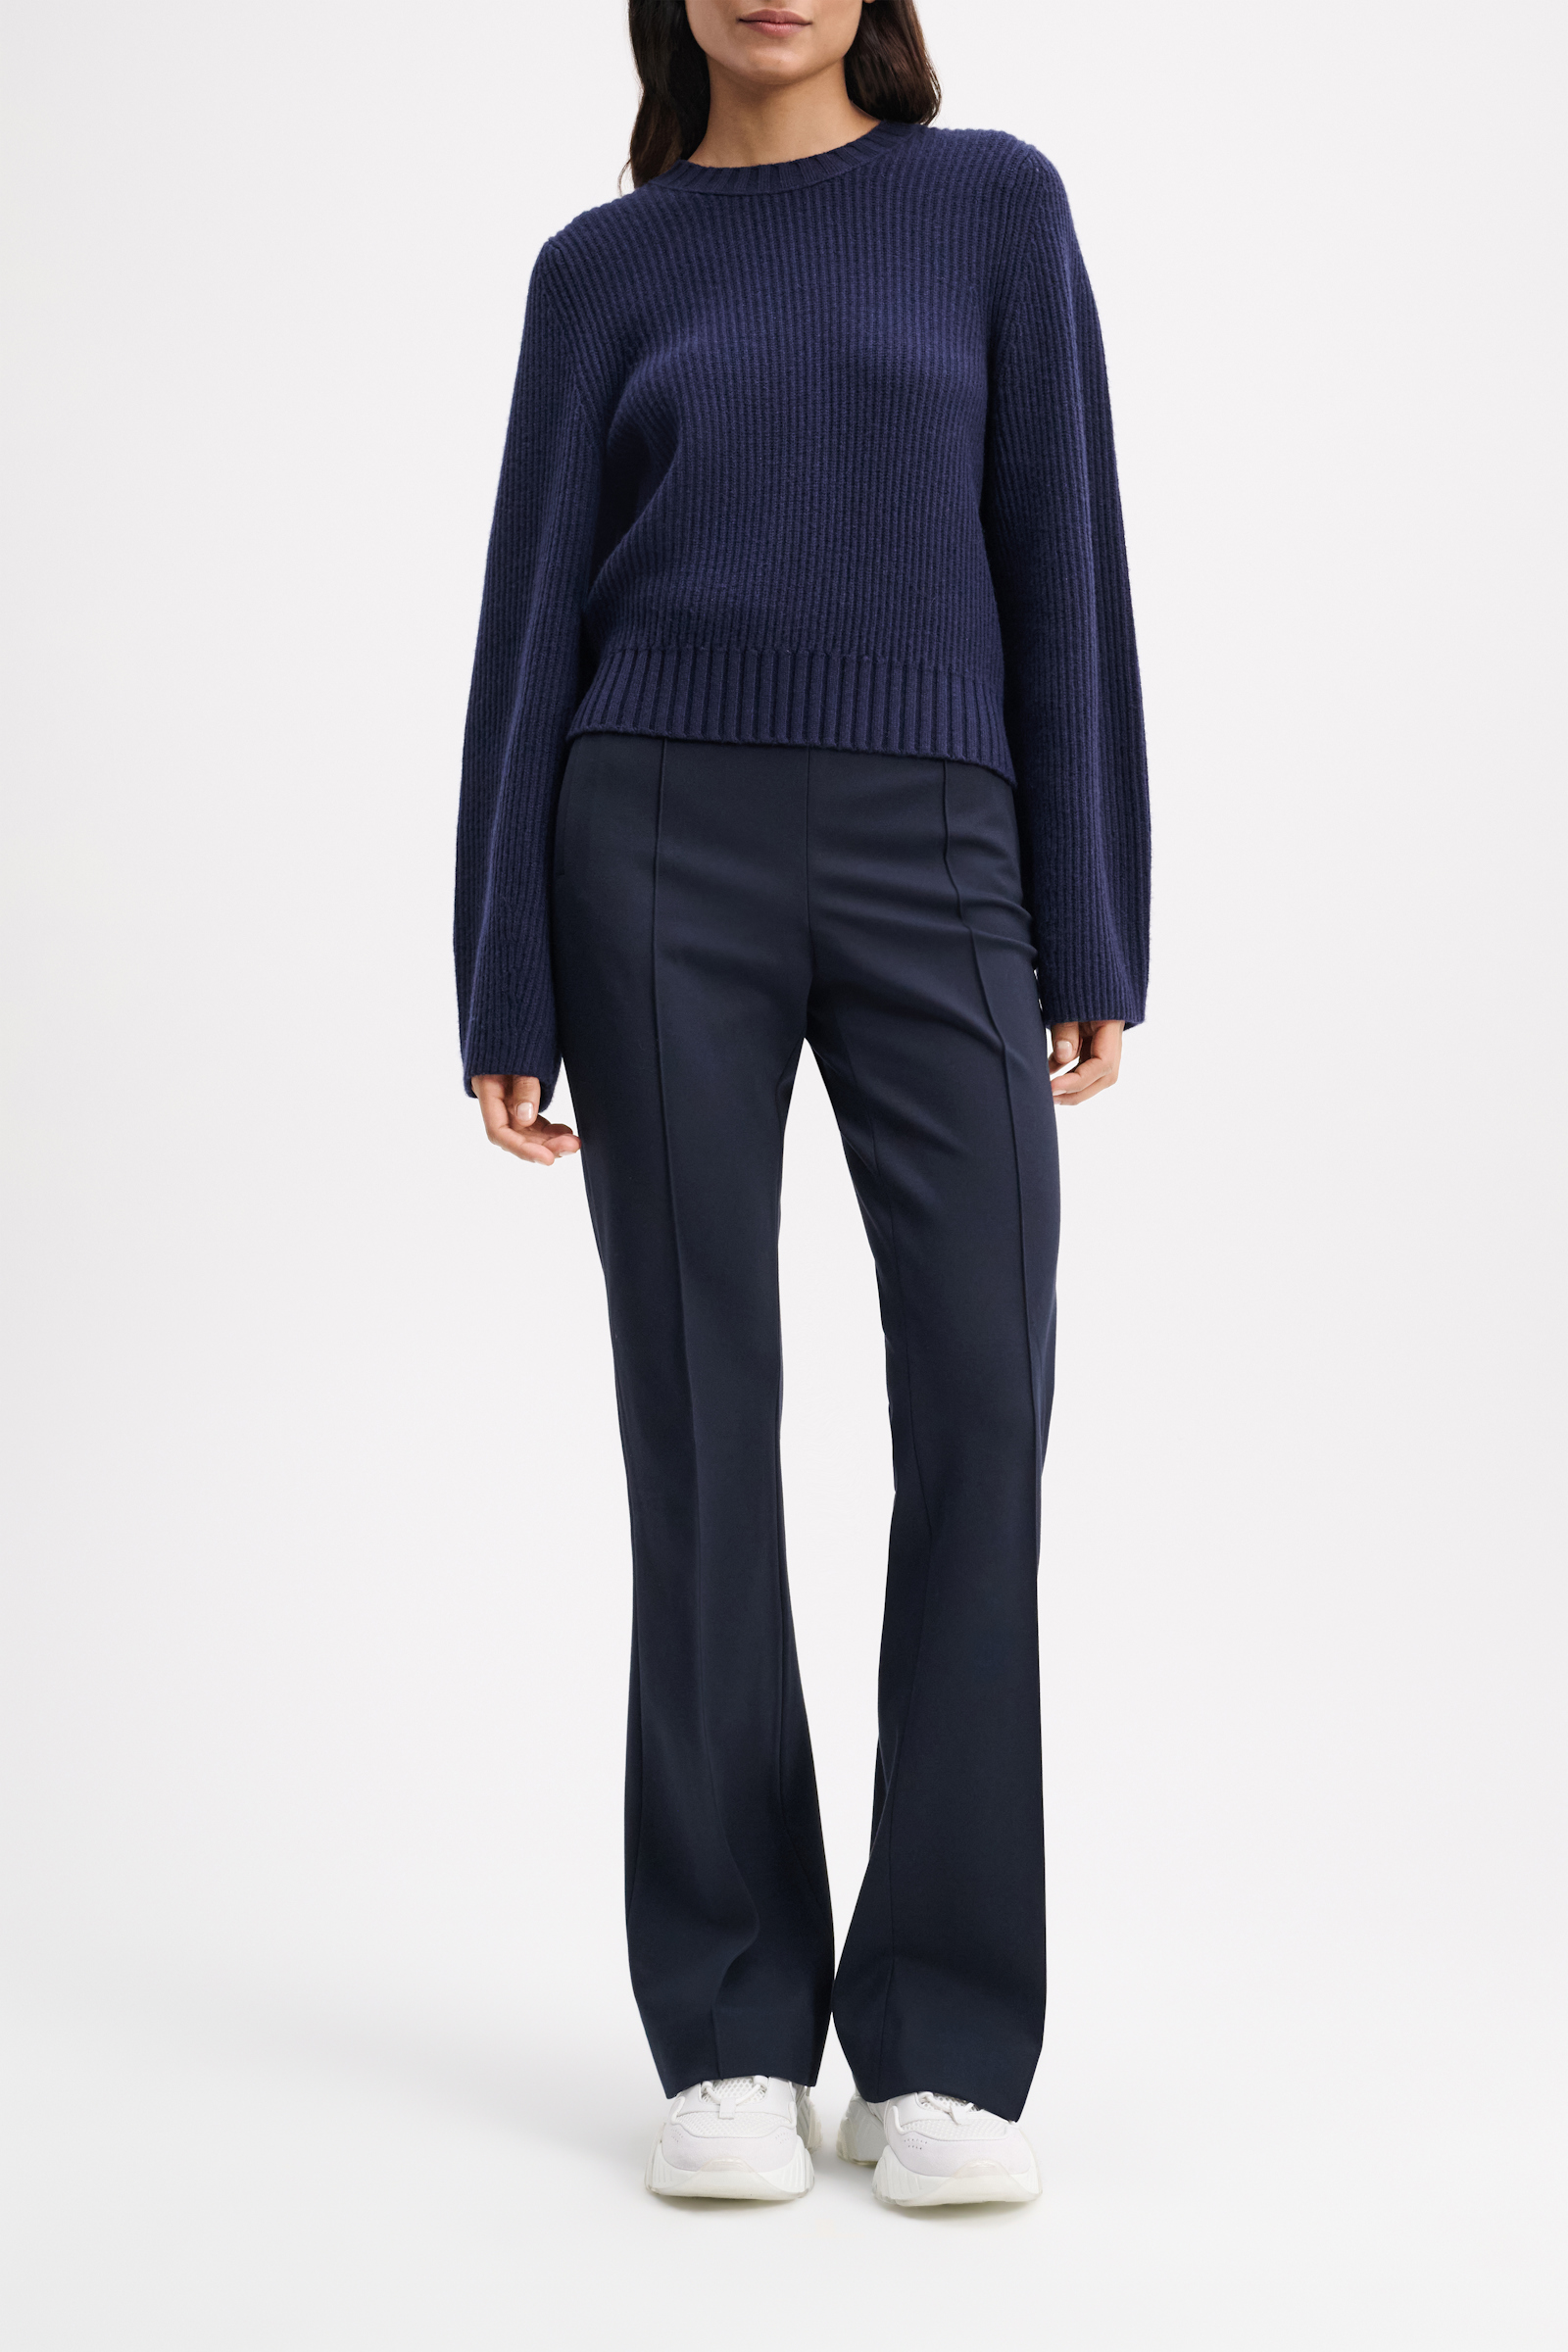 Dorothee Schumacher RIBBED PULLOVER IN MERINO AND CASHMERE true navy